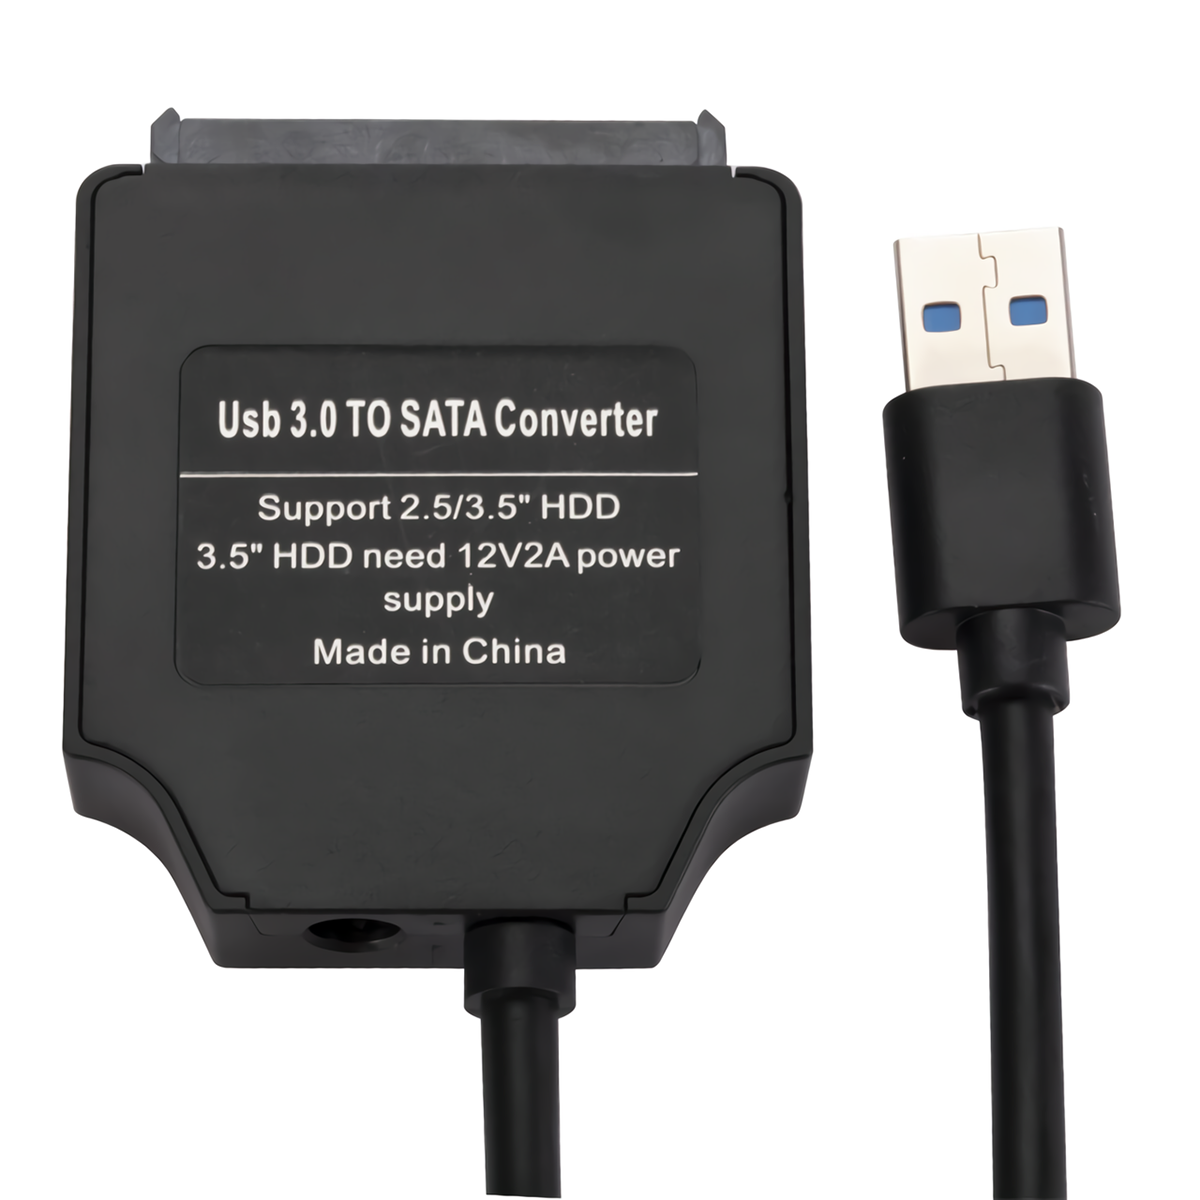 MnnWuu-SSD-HDD-USB-30-to-SATA-Converter-Cable-Hard-Drive-Converter-Adapter-Support-25--35quot-HDD-SS-1951620-5